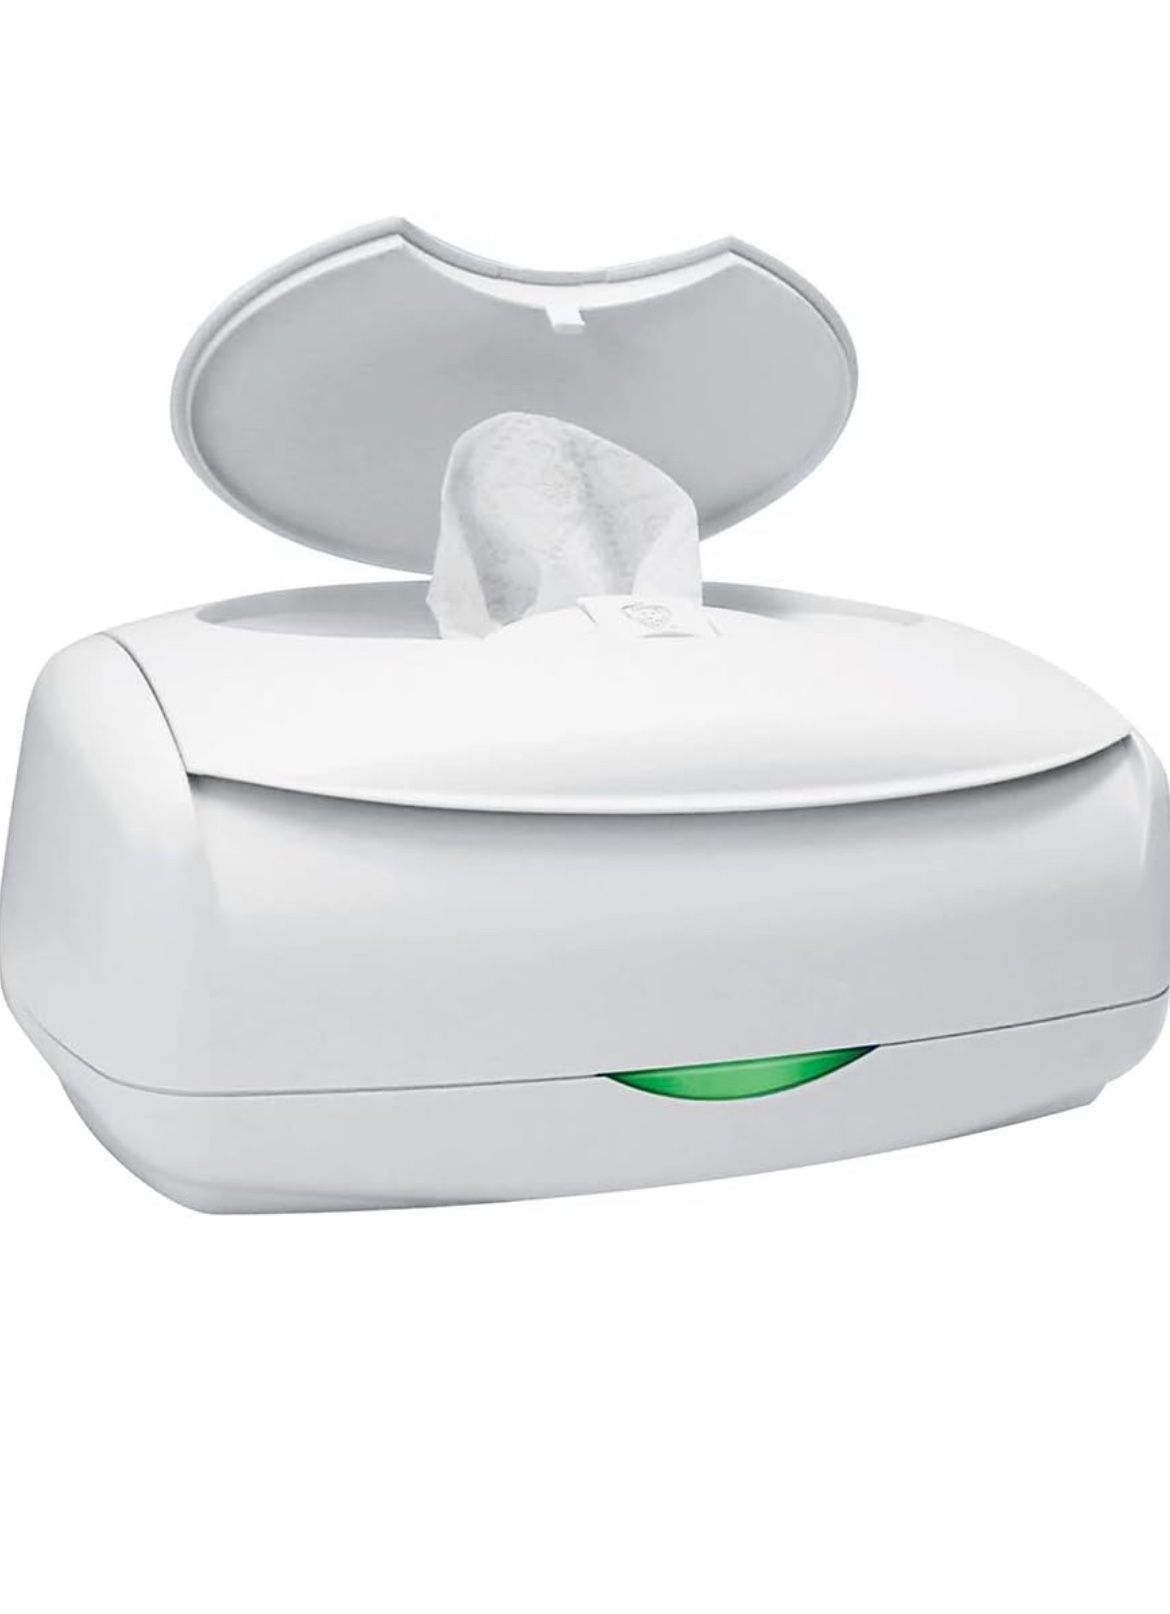 Prince Lionheart Ultimate Wipes Warmer with an Integrated Nightlight